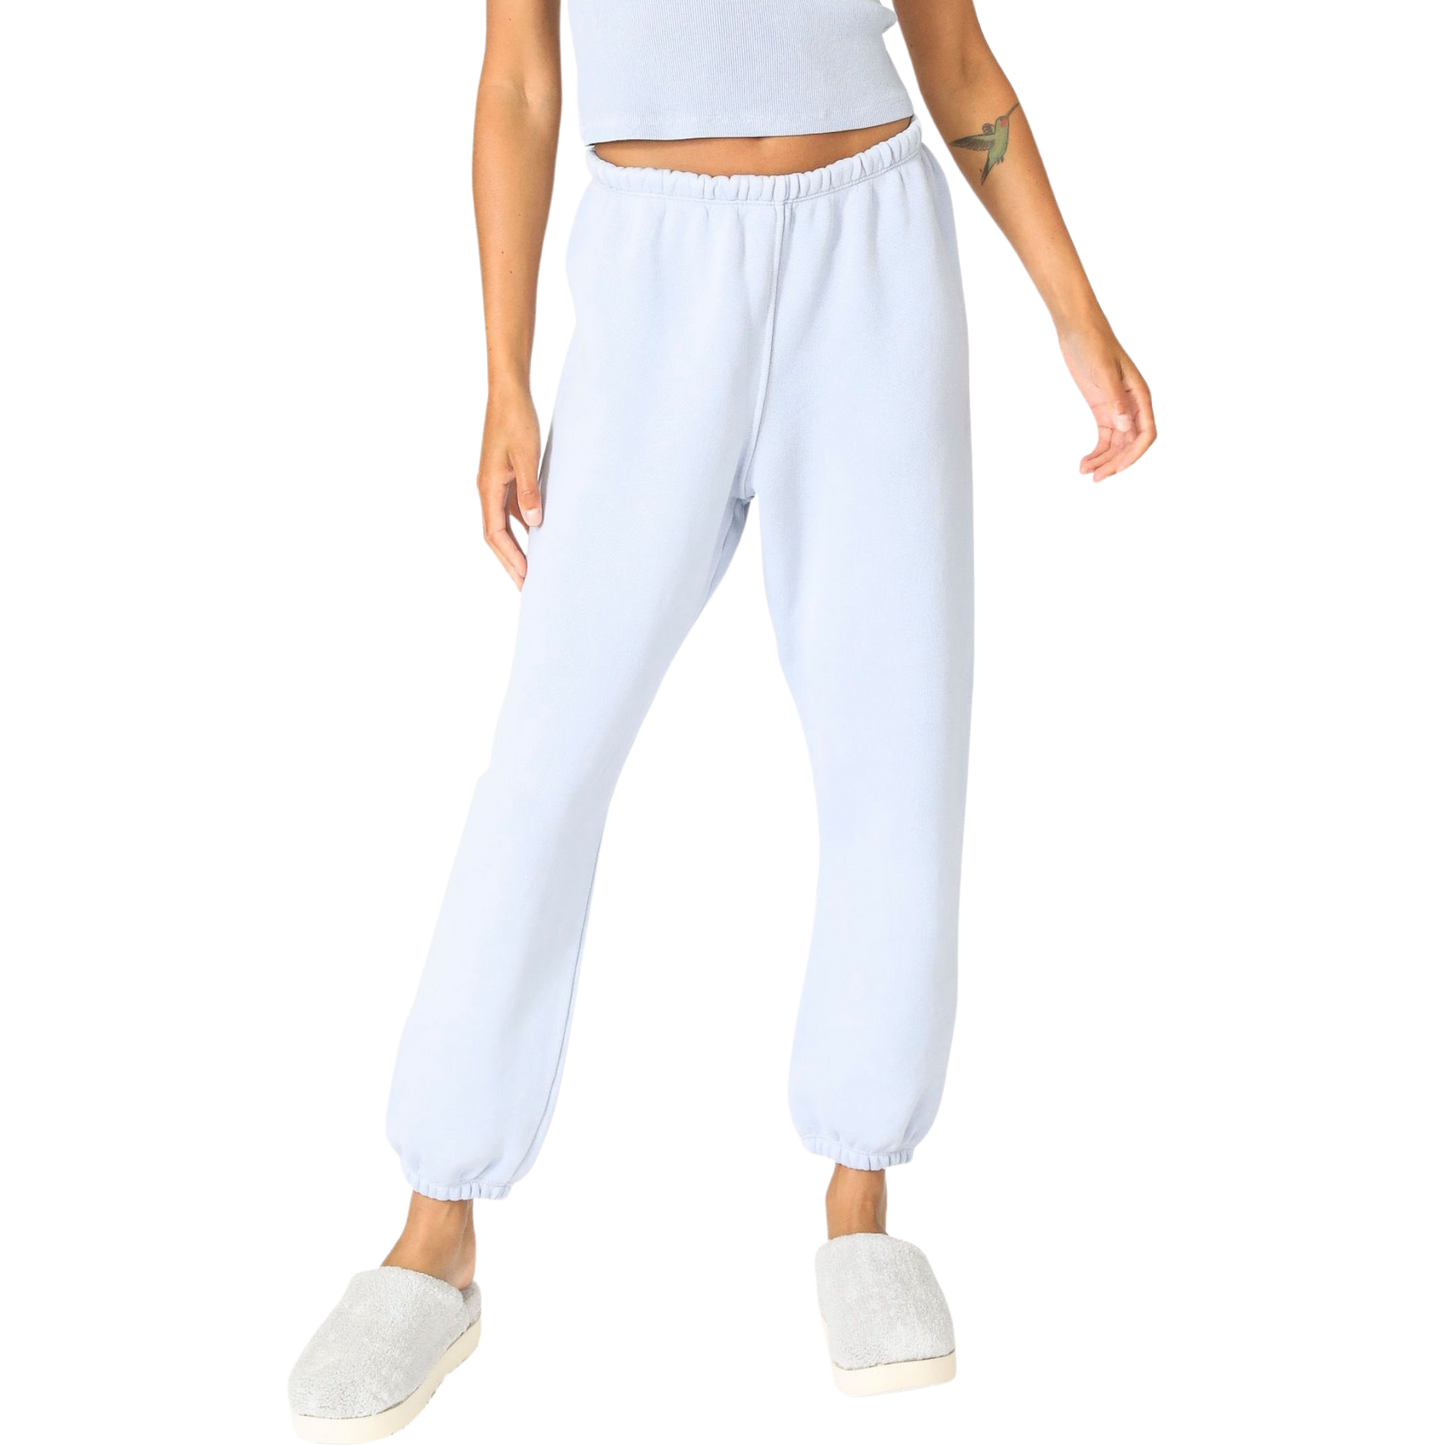 perfectwhitetee The Periwinkle Set